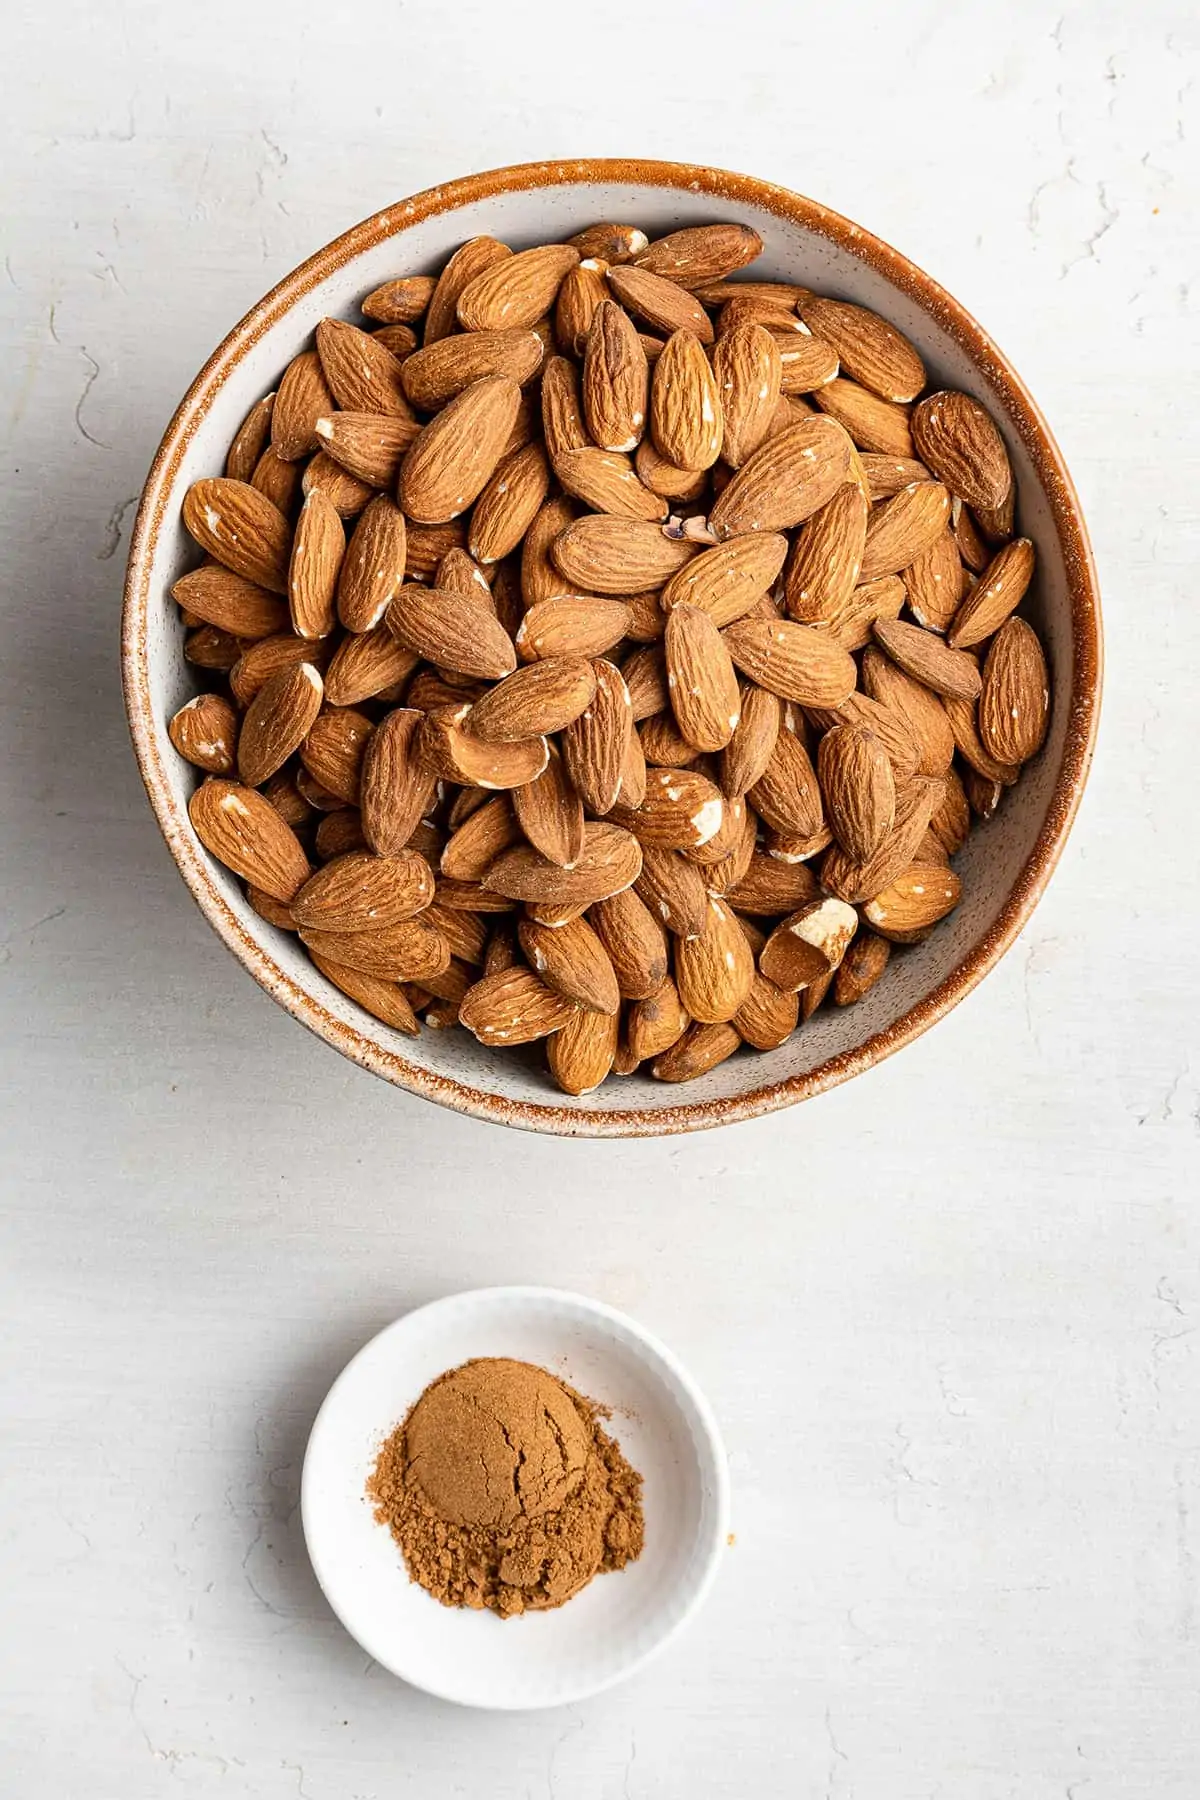 Overhead view of a bowl of almonds next to a bowl of pumpkin spice mix